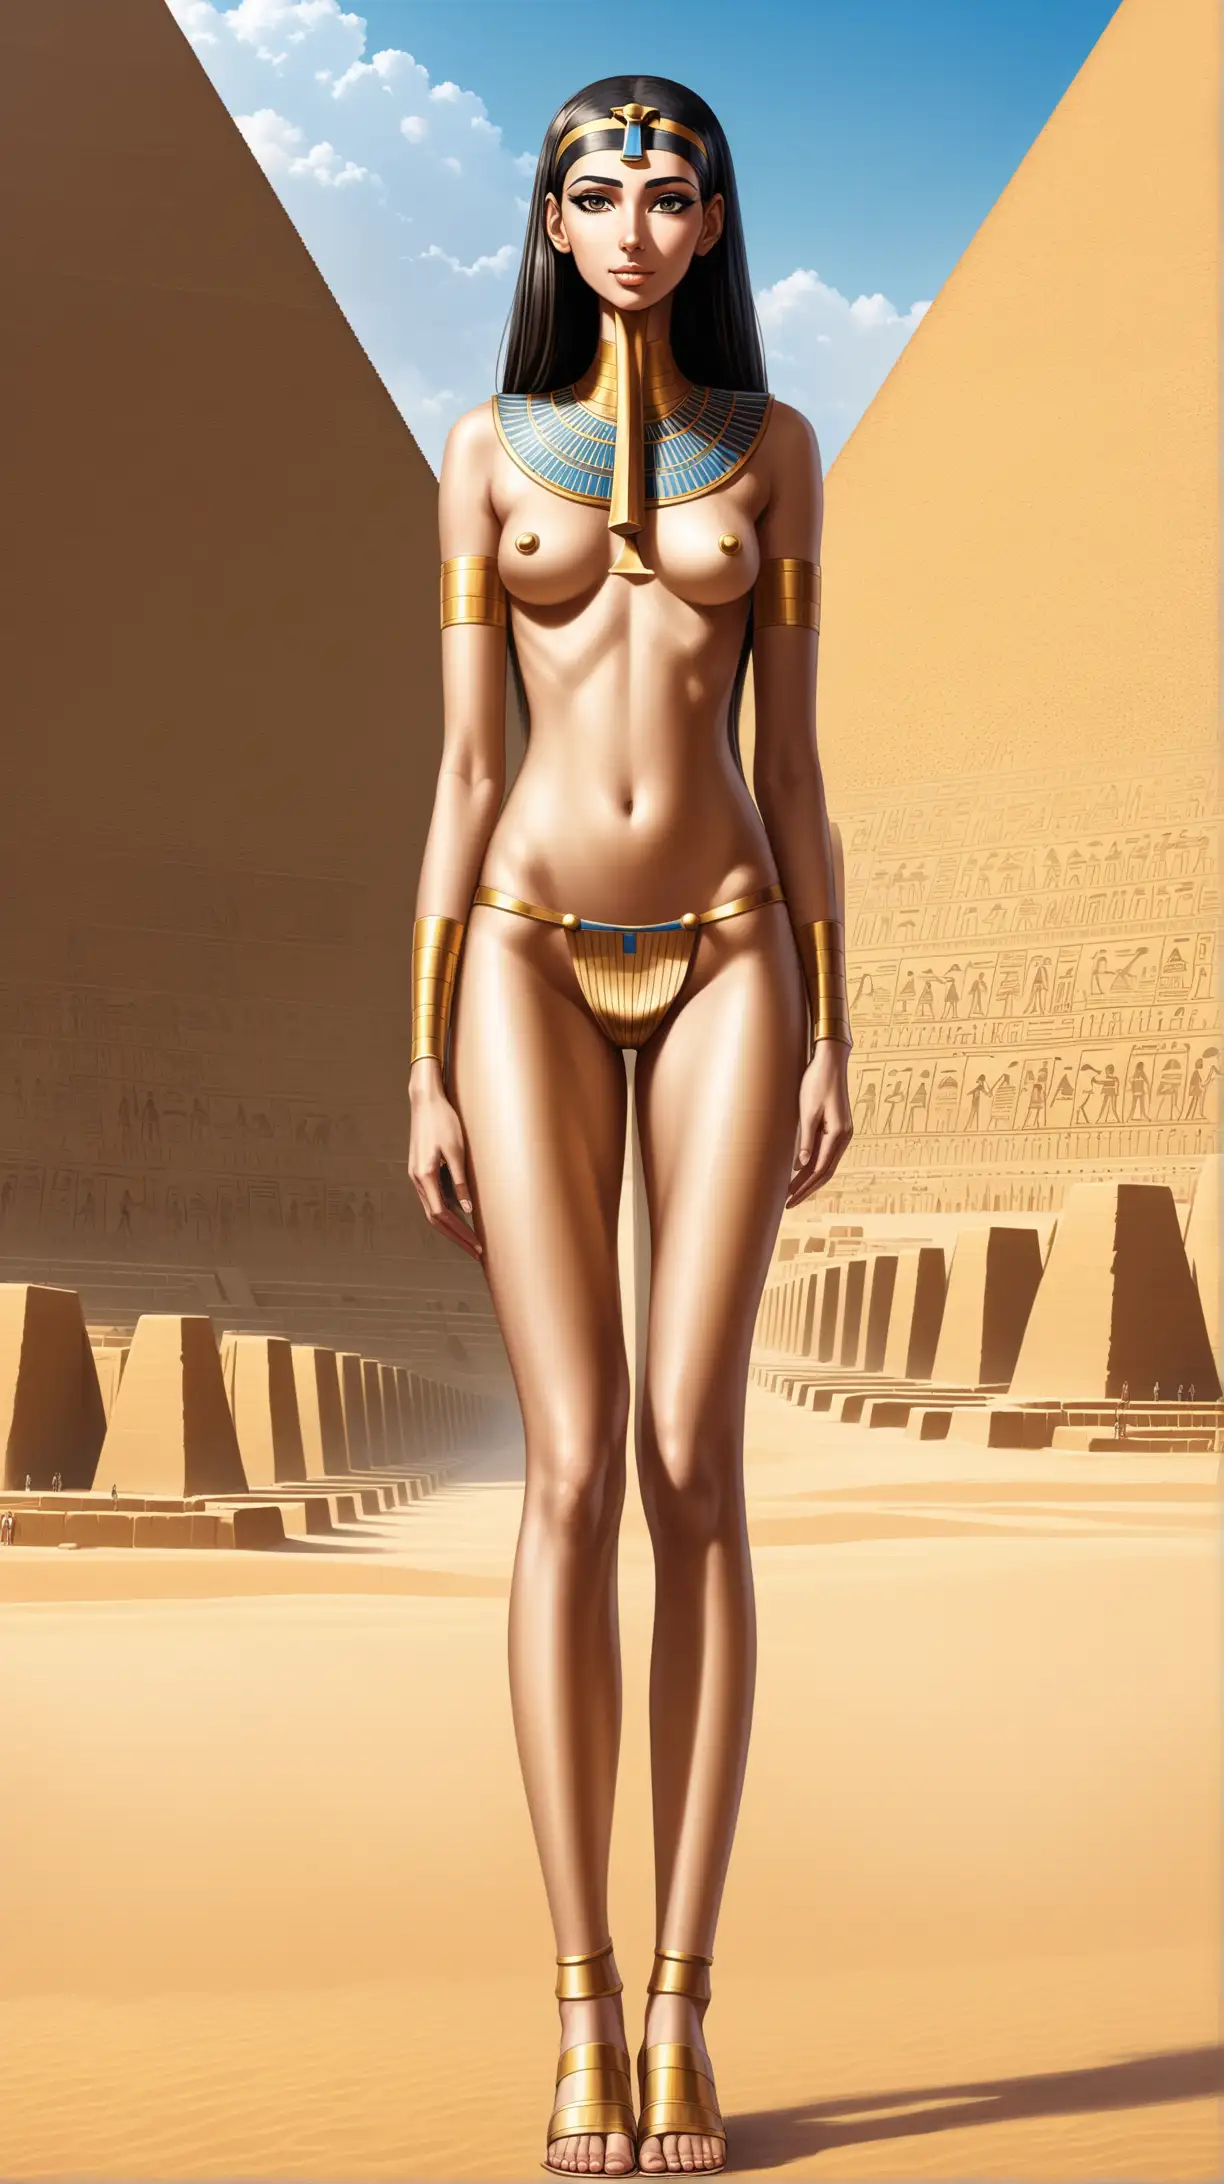 Very tall woman from Ancient Egypt, 20 years old, unnaturally long neck, photo-realism, very long legs, outside near pyramid, full body facing camera